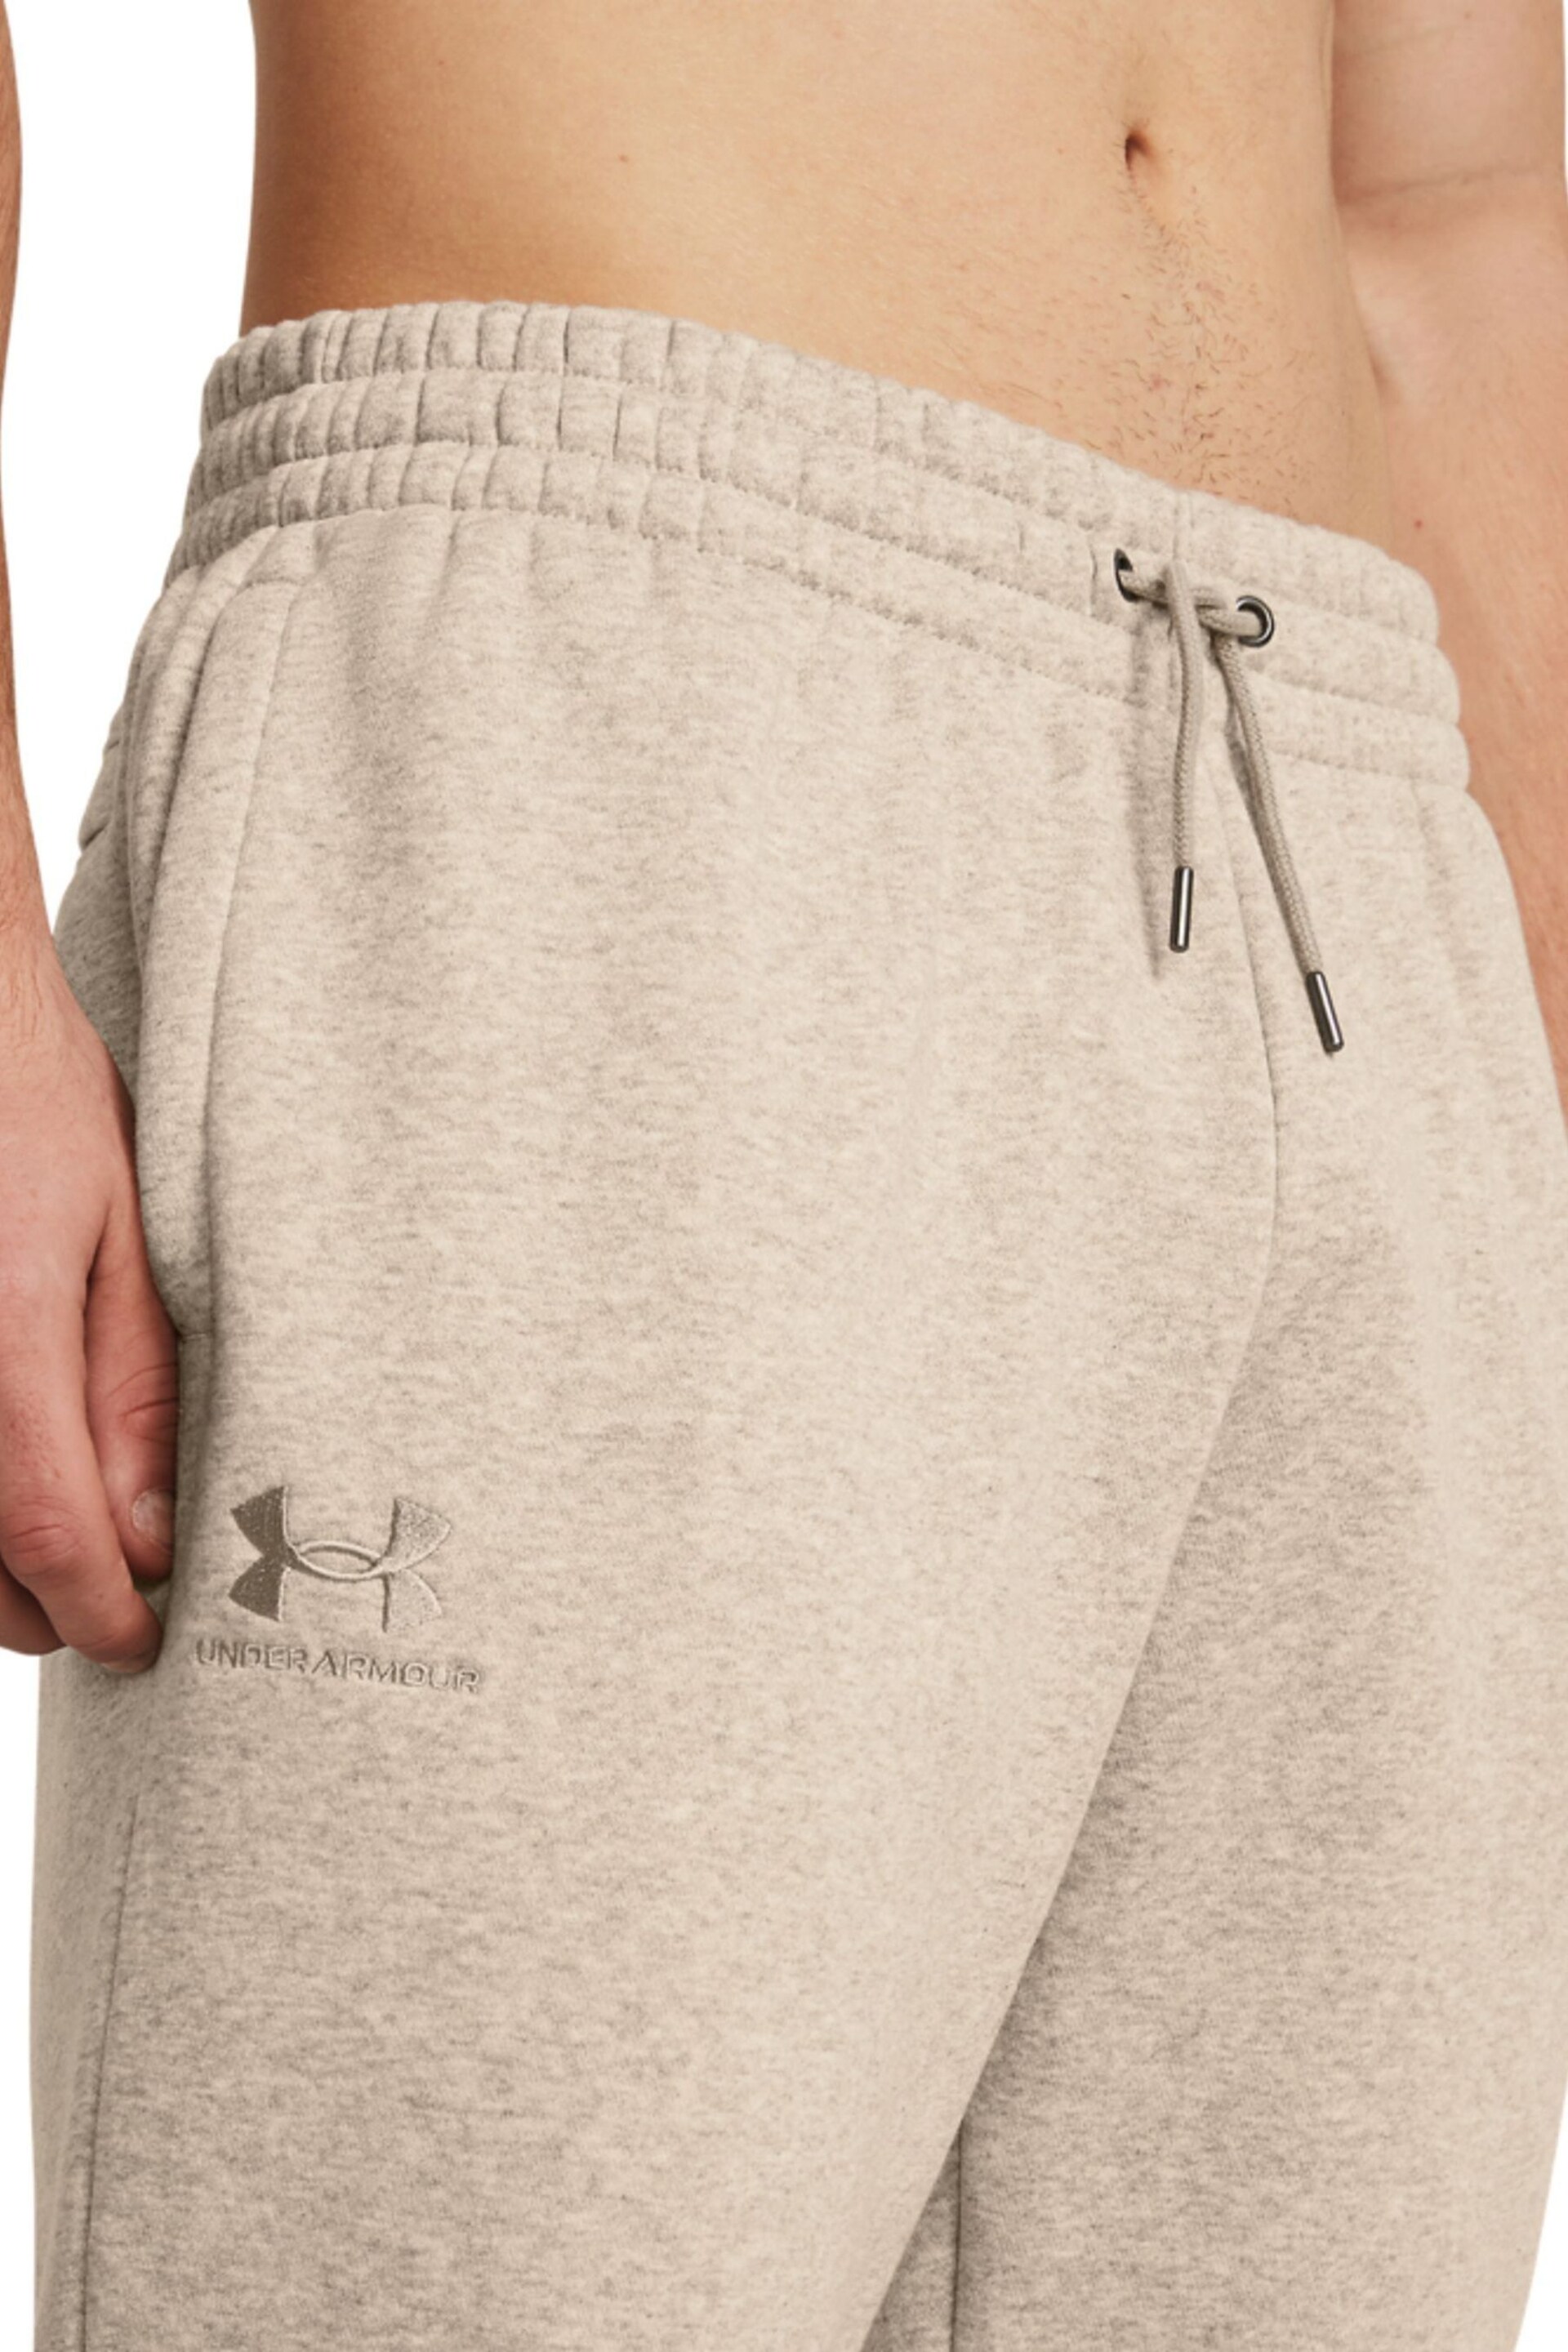 Under Armour Beige Under Armour Beige Icon Fleece Joggers - Image 4 of 7